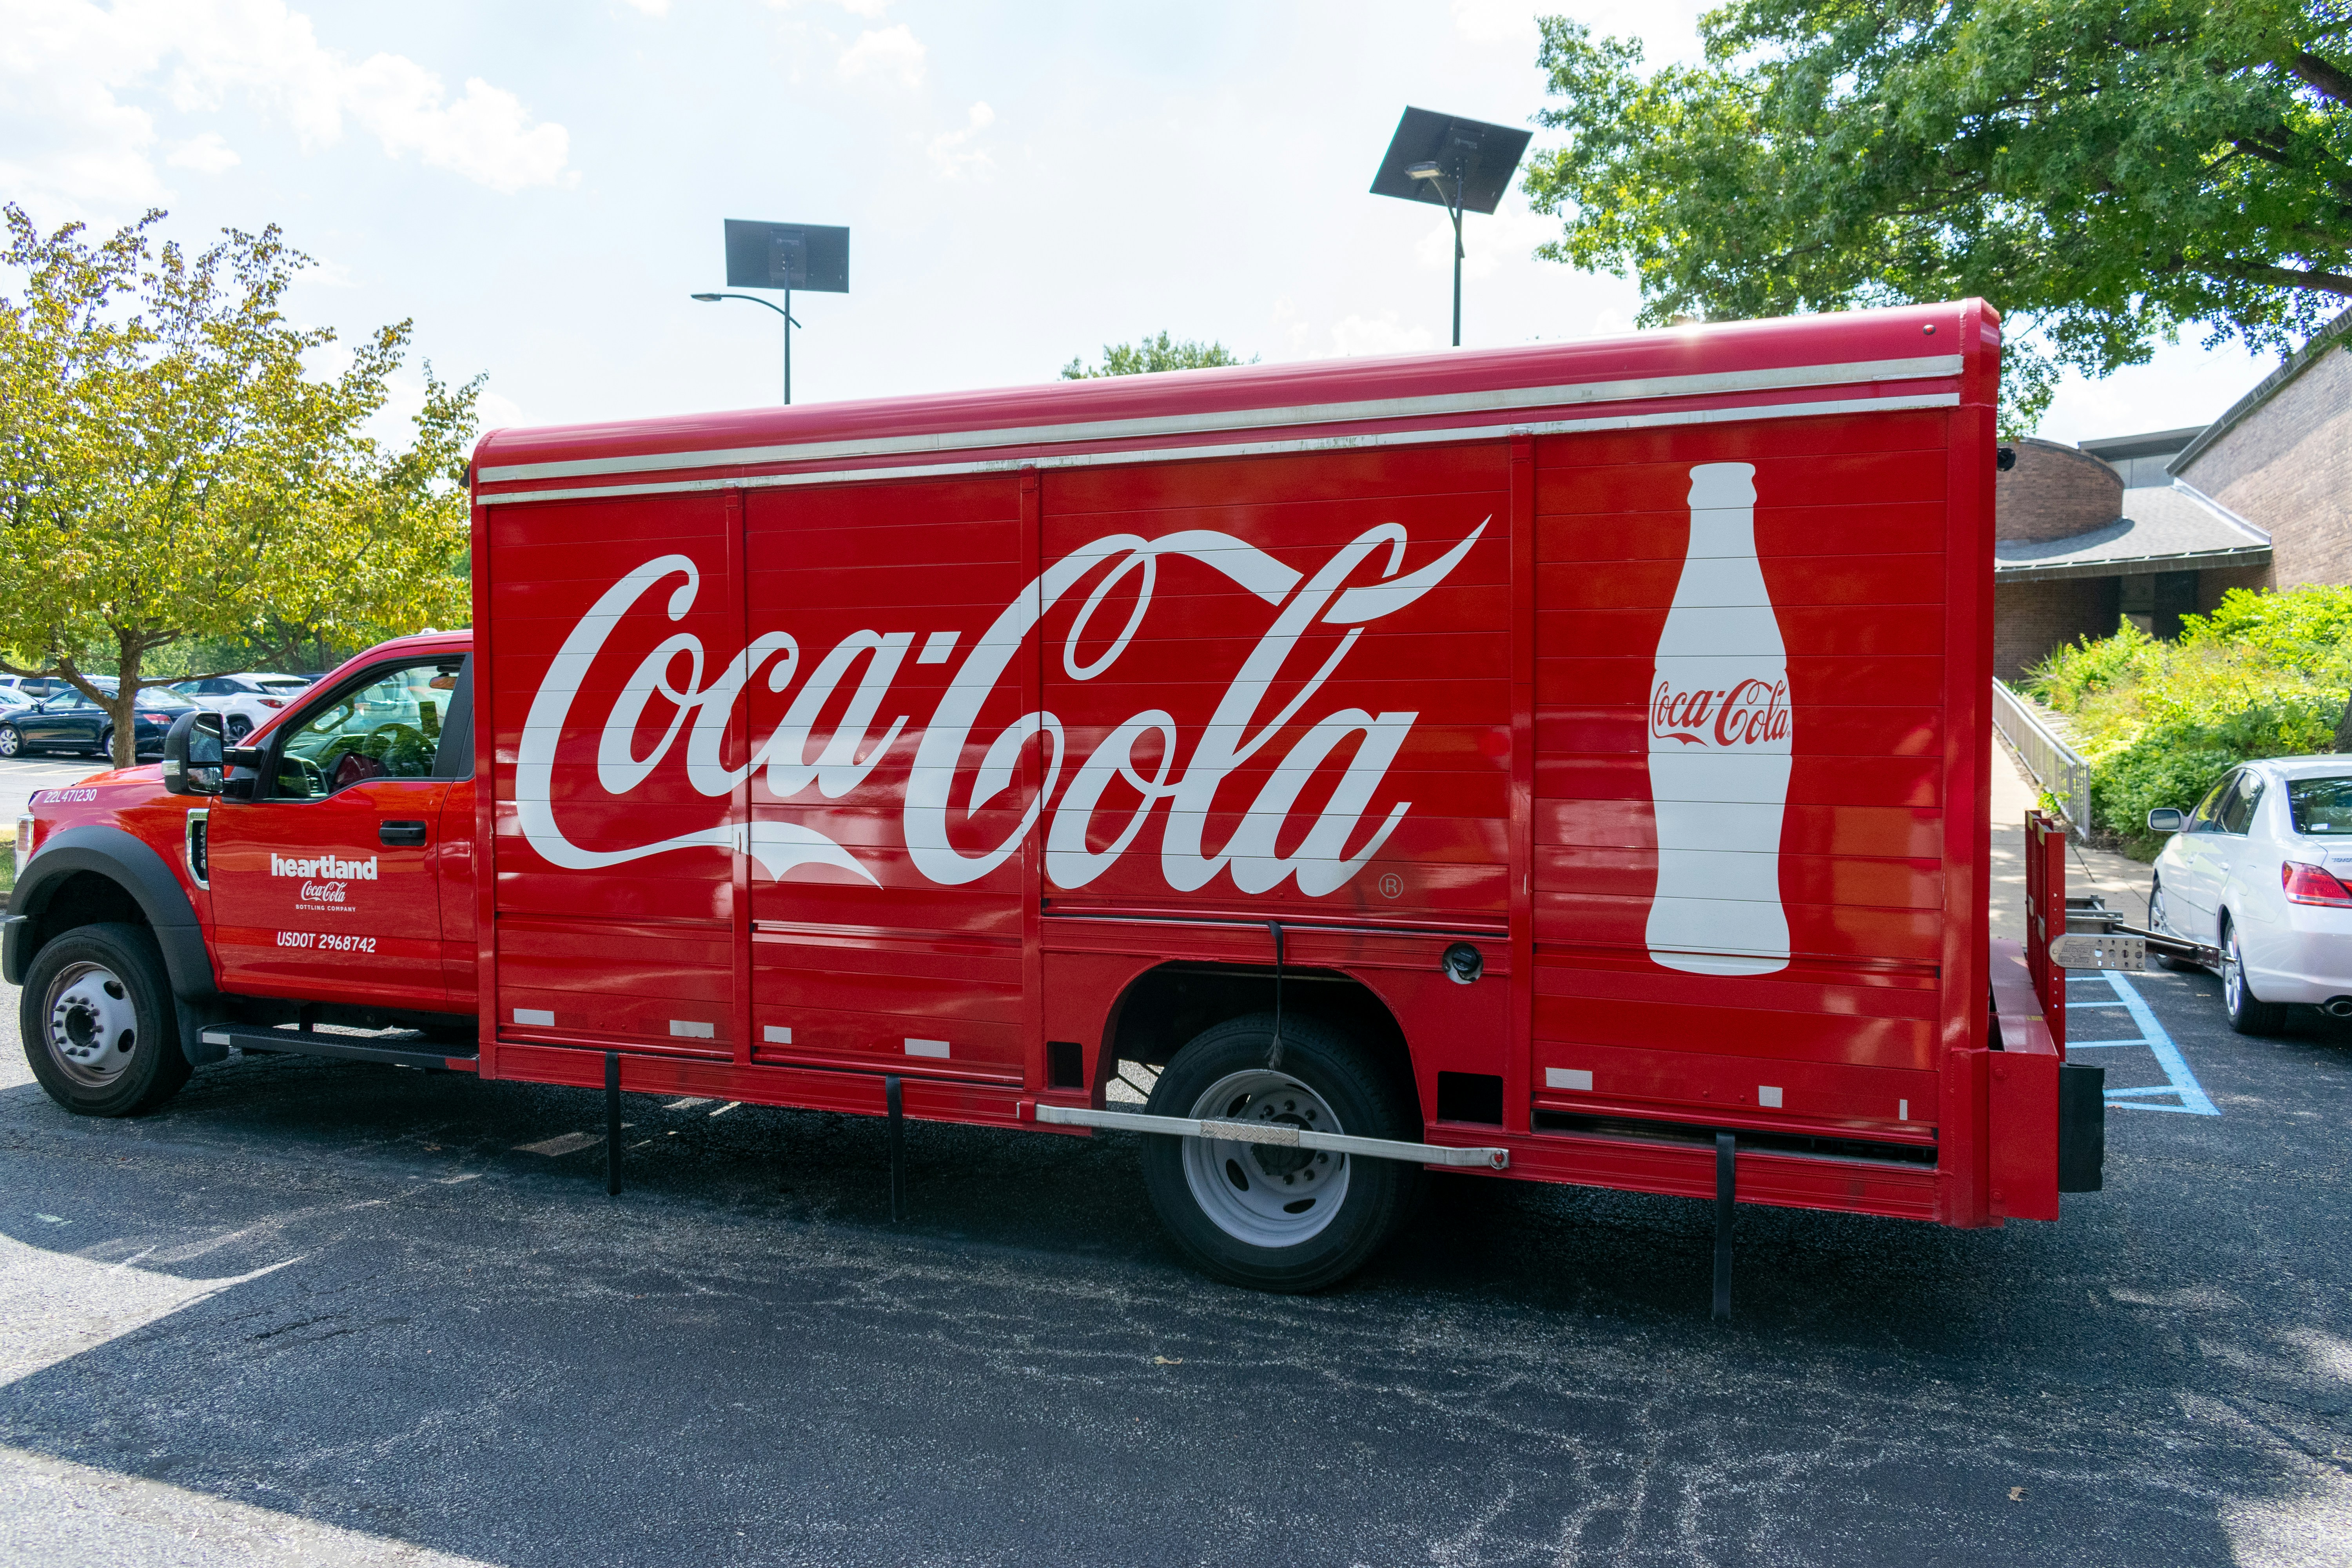 a coca - cola truck parked in a parking lot